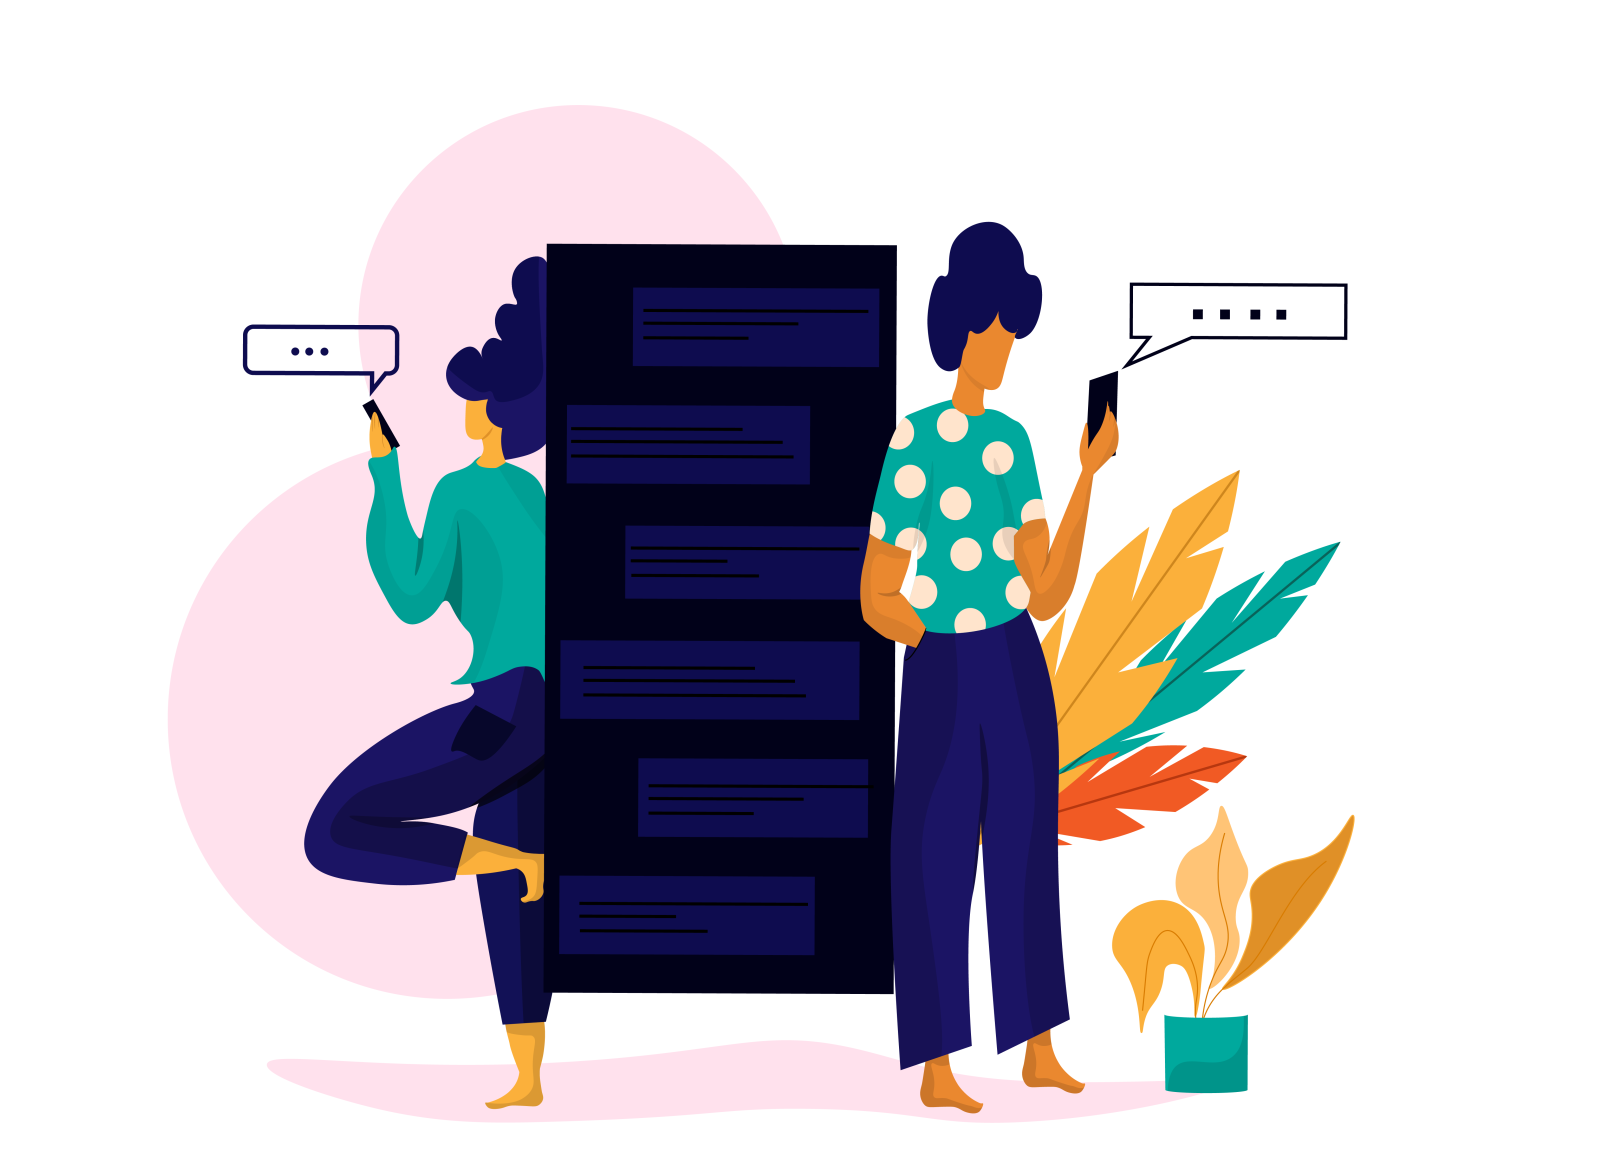 Online Chatting Illustration By Yeashna Ahmed On Dribbble